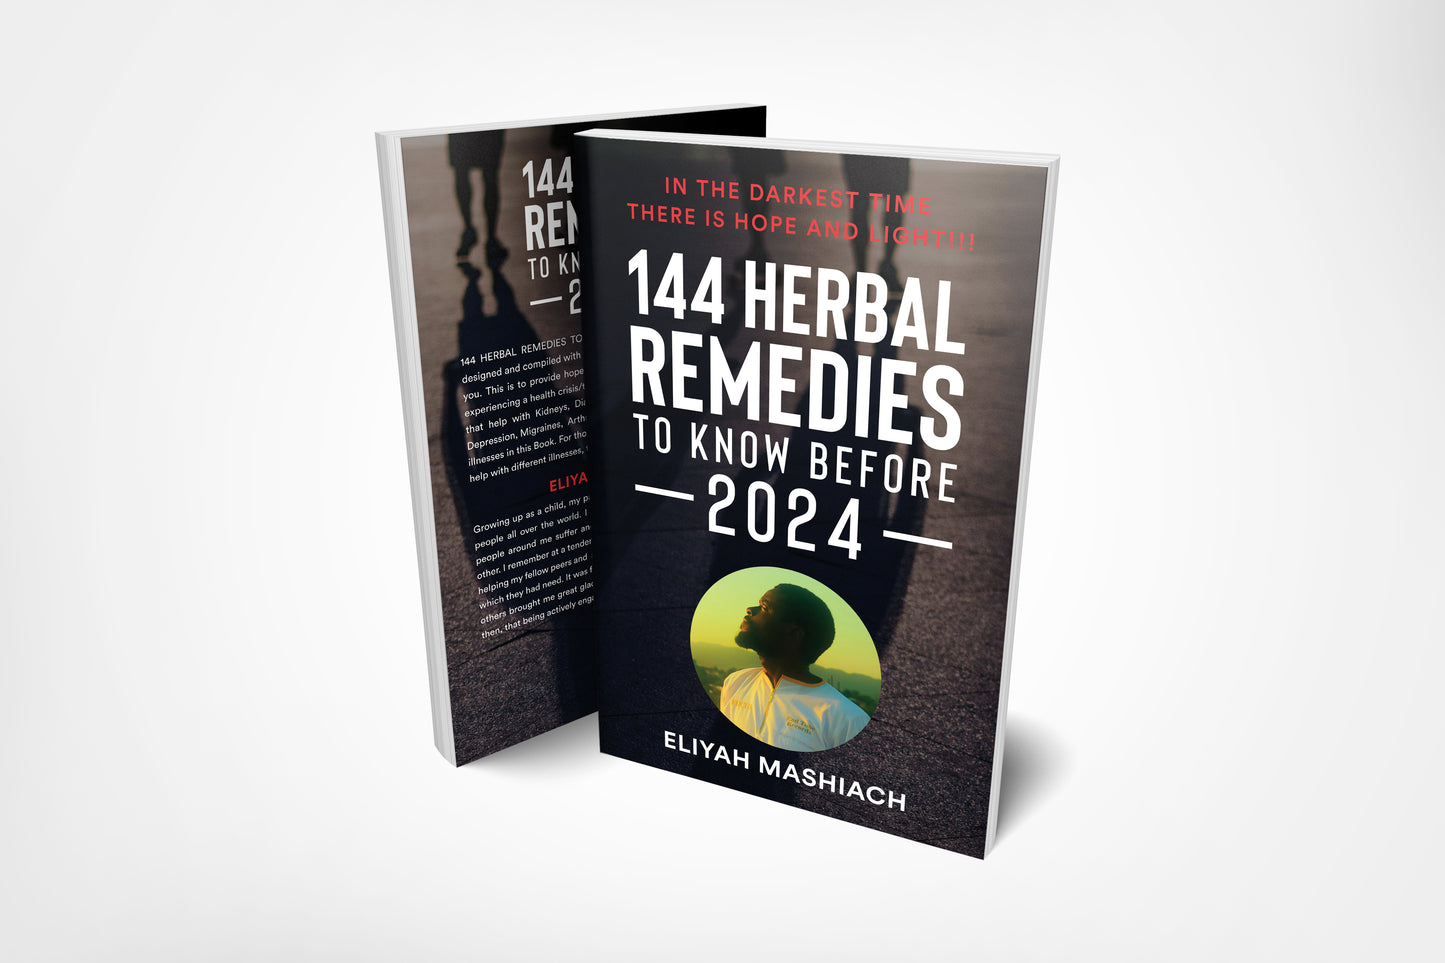 144 HERBAL REMEDIES TO KNOW BEFORE 2024